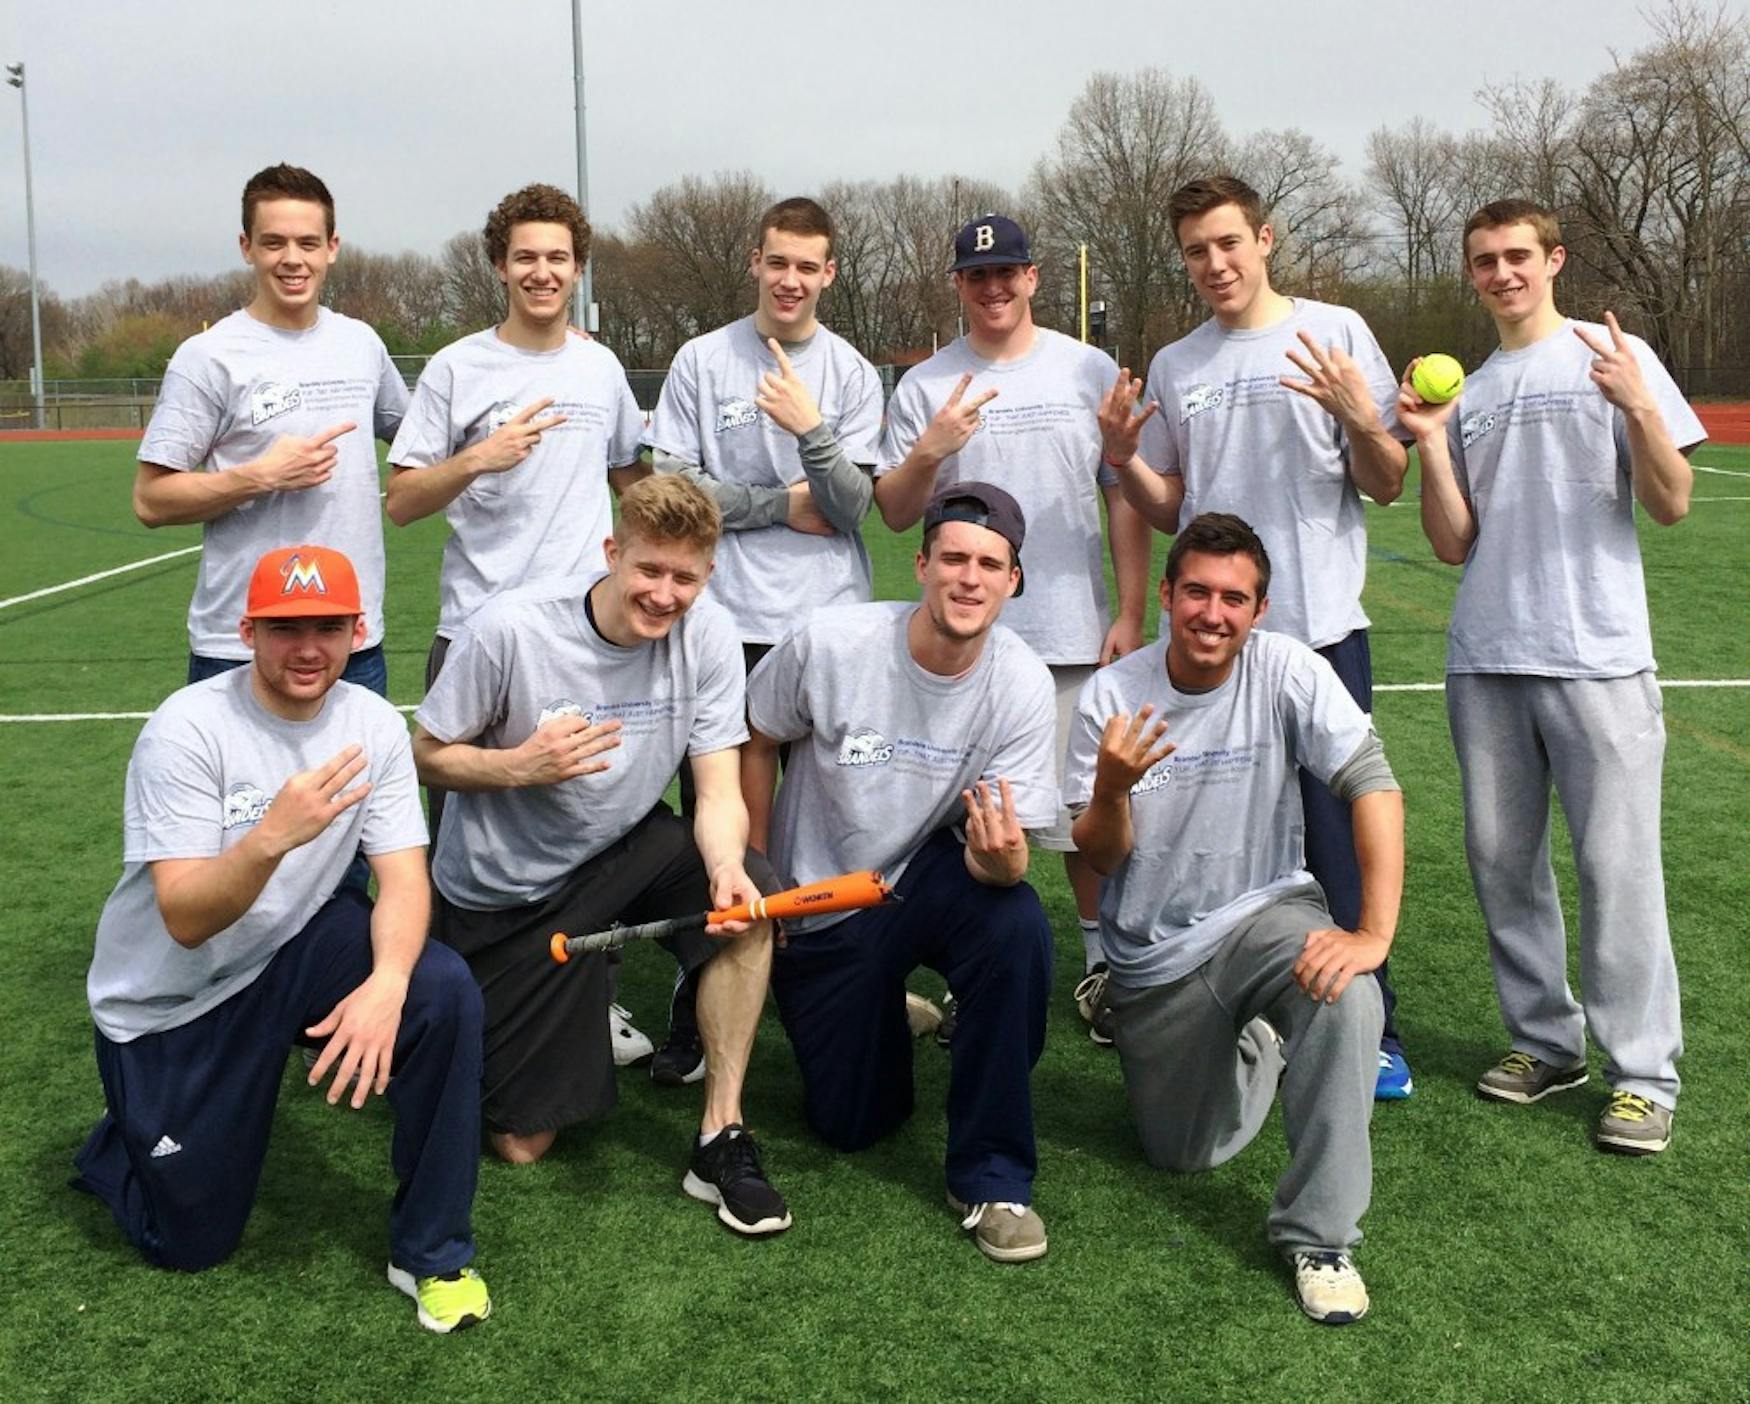 Members of the Grout Bullies pose with their new t-shirts following a 17-10 win in the championship game.